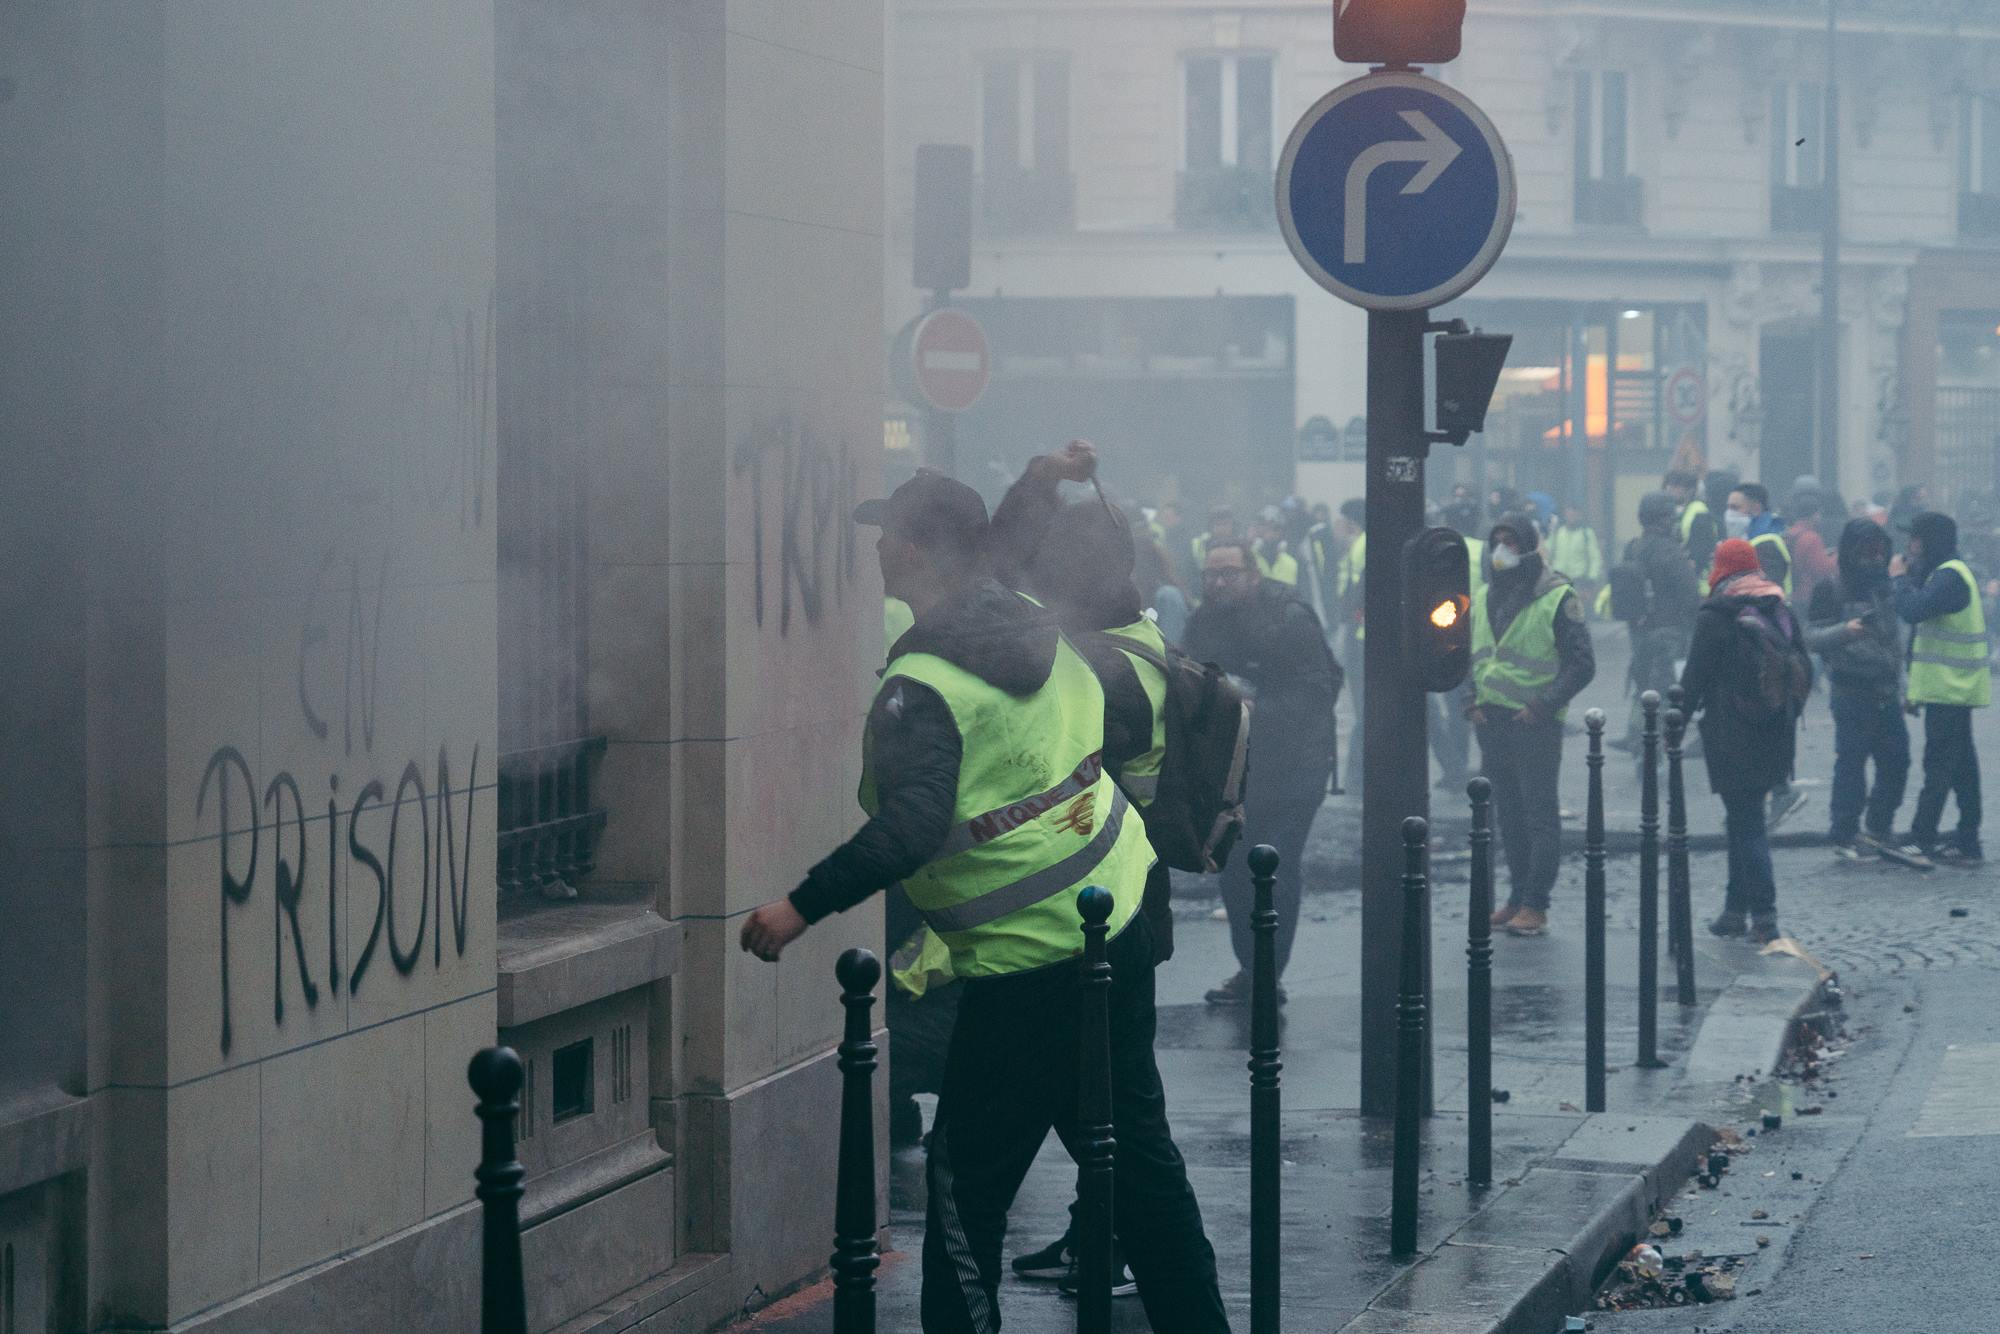 Yello Vests Protests in France